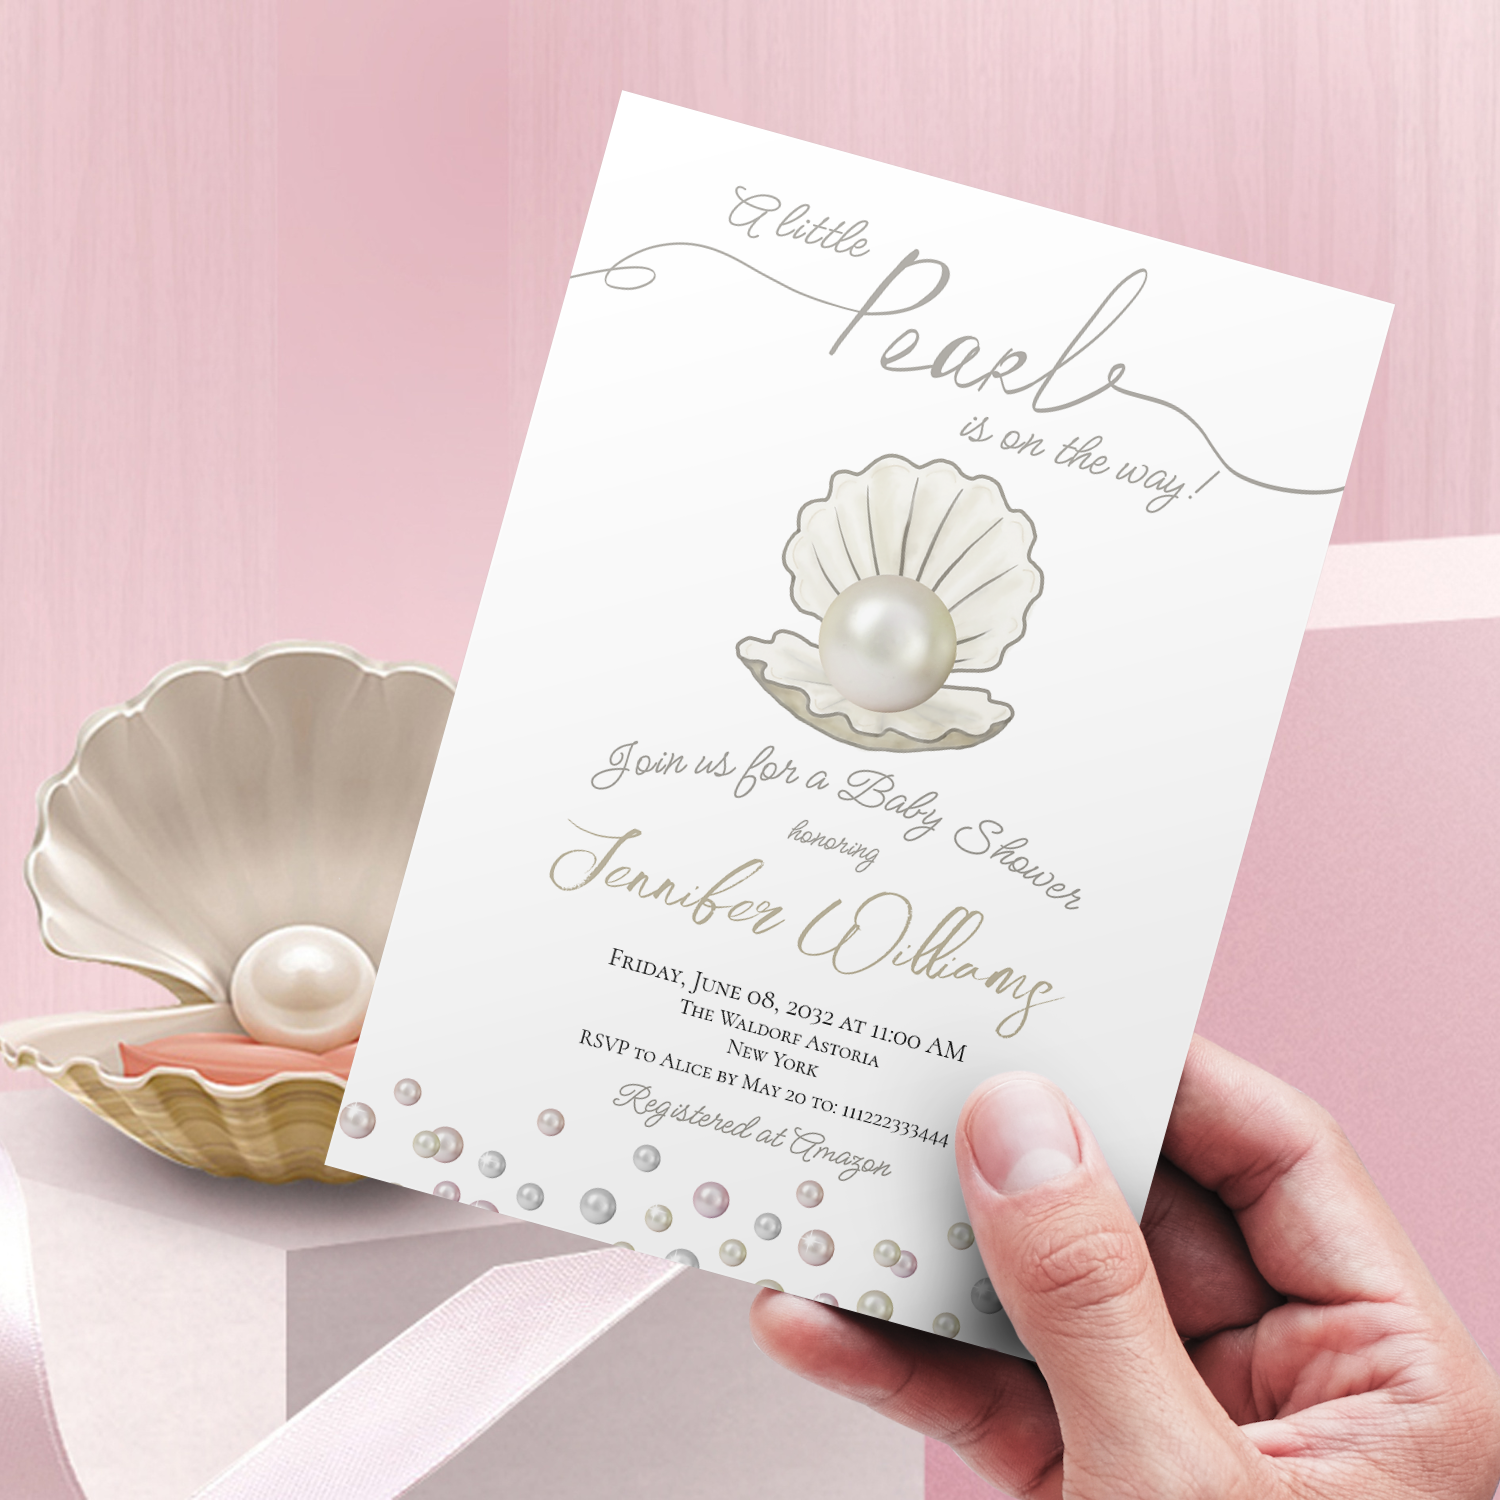 Modern Hand Painted Seashell with Pearl Core and Pearls Decor and Calligraphy script text " A little pearl on the way" Under the Sea Themed Baby Shower Invitation